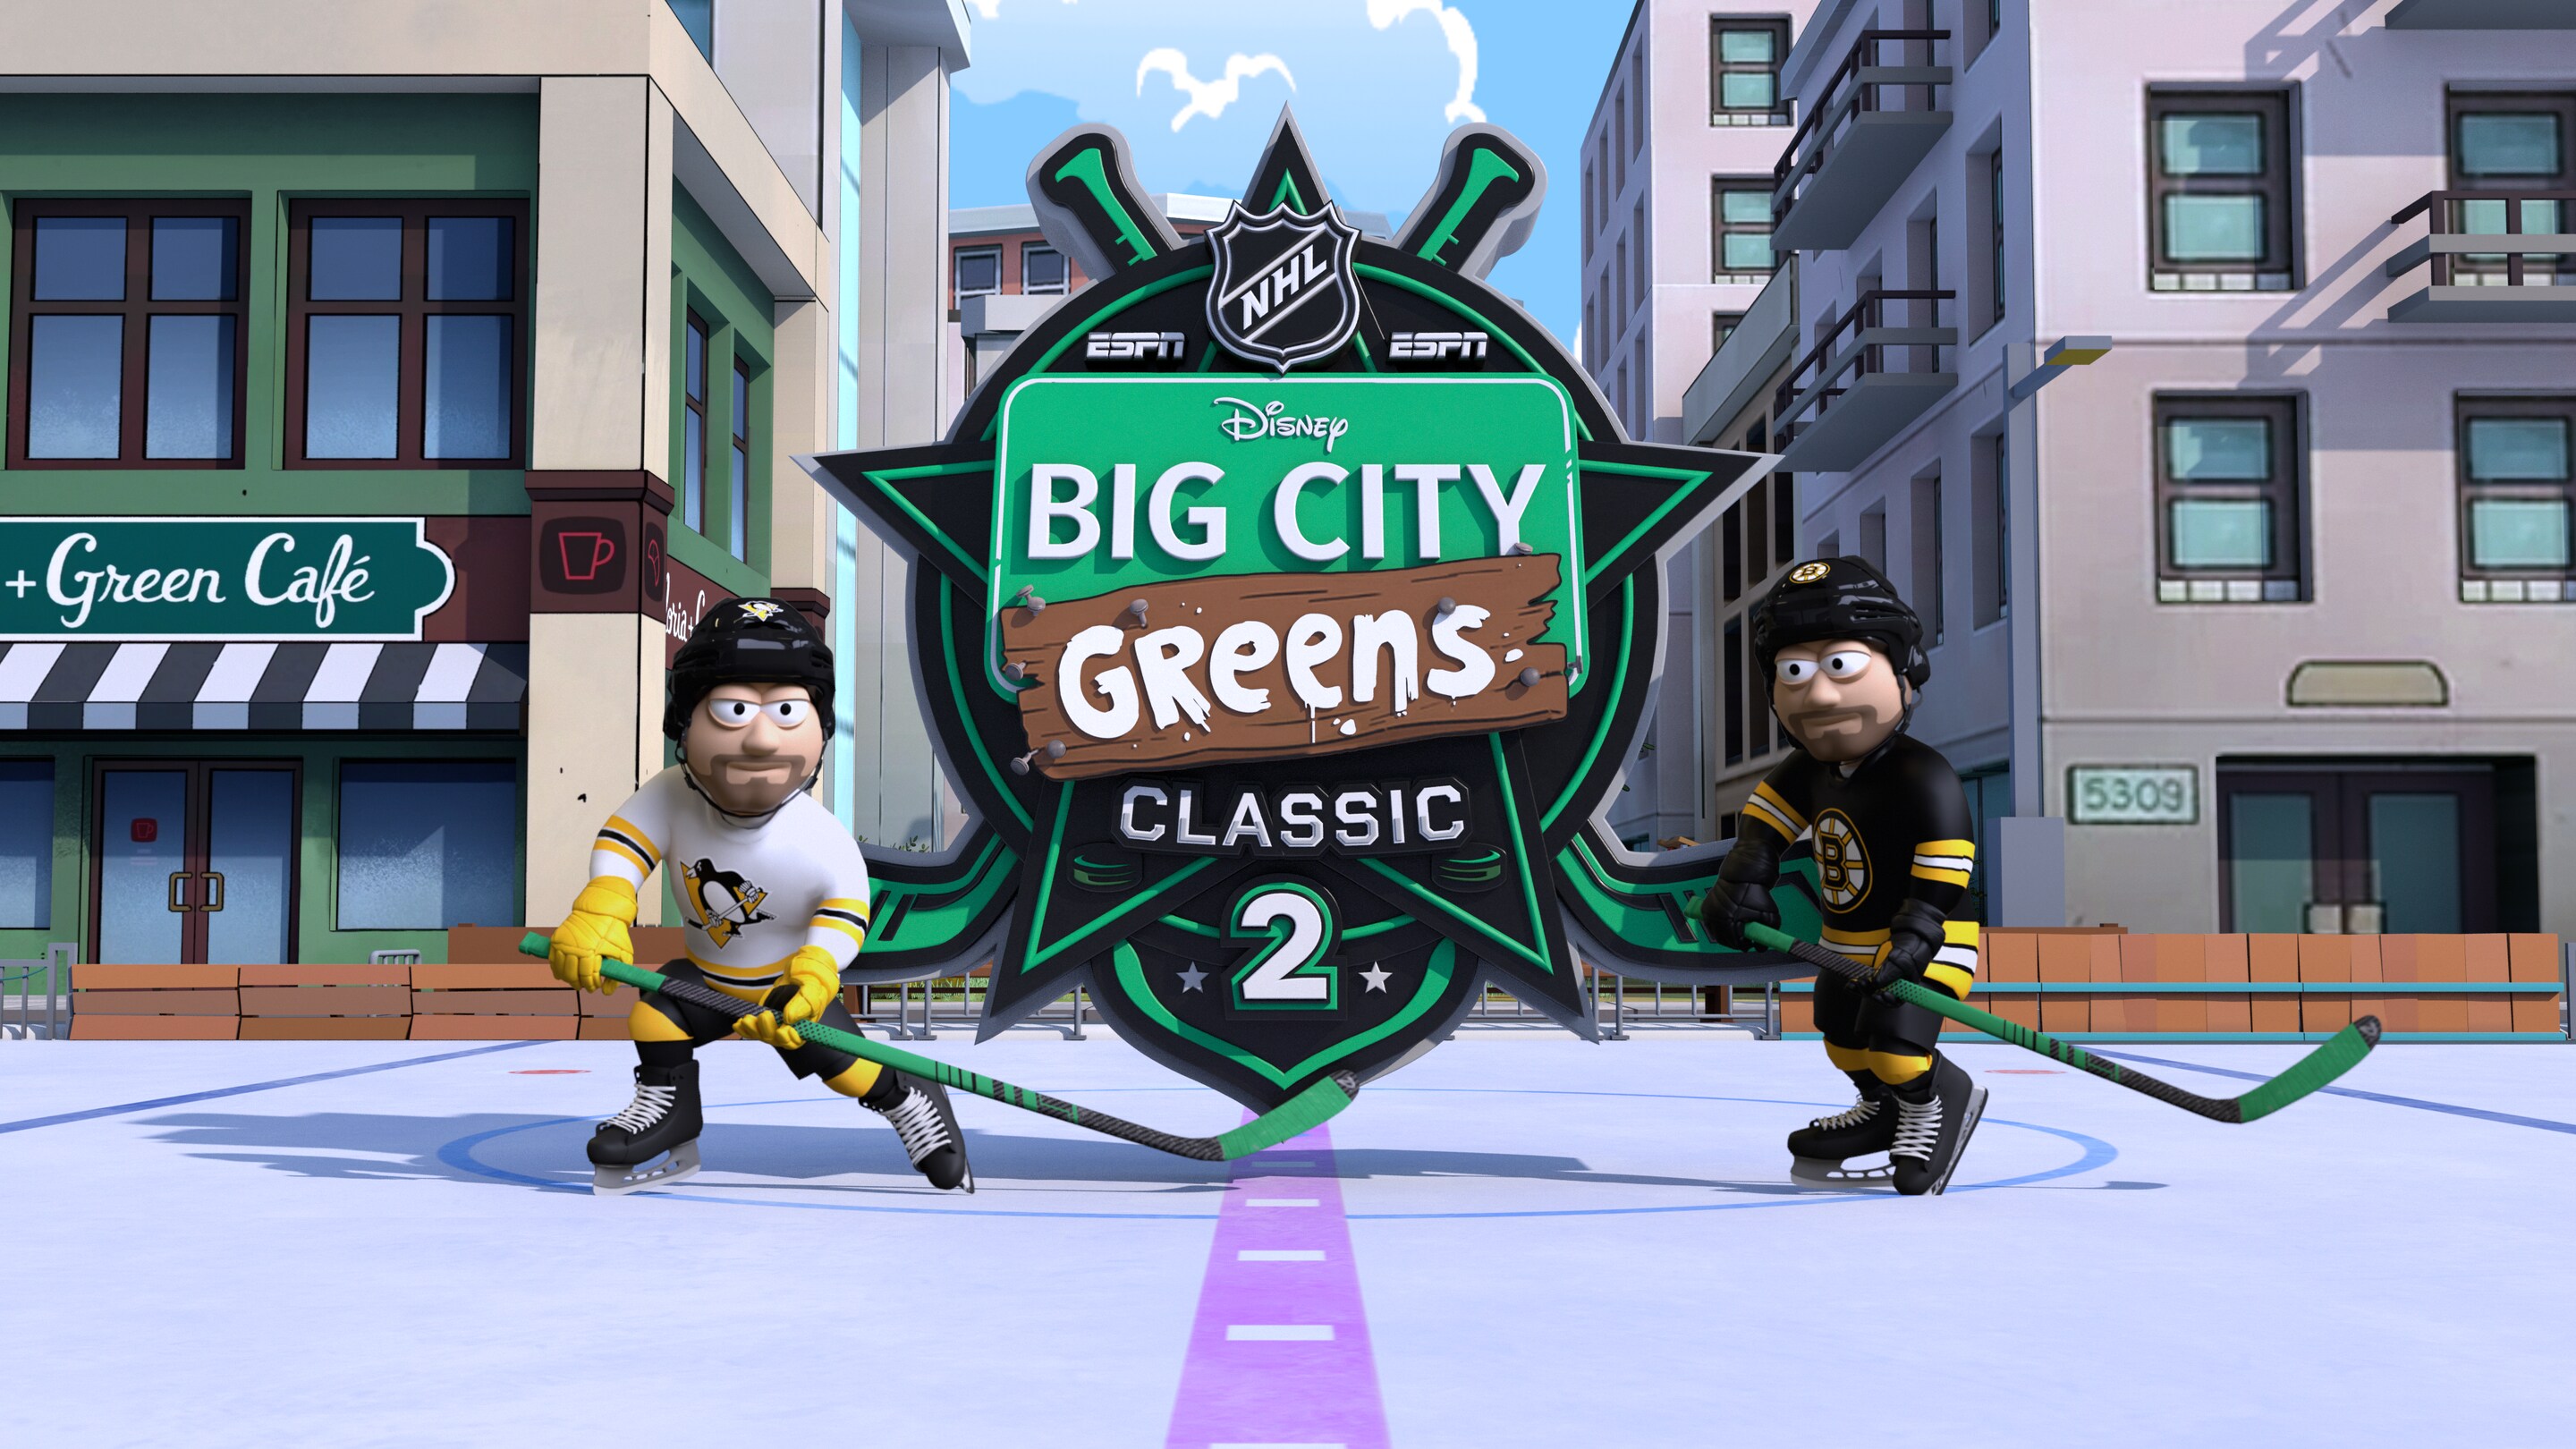 Disney Advertising Pushes the Boundaries with Brands for Second NHL Big City Greens Classic Alt-Cast